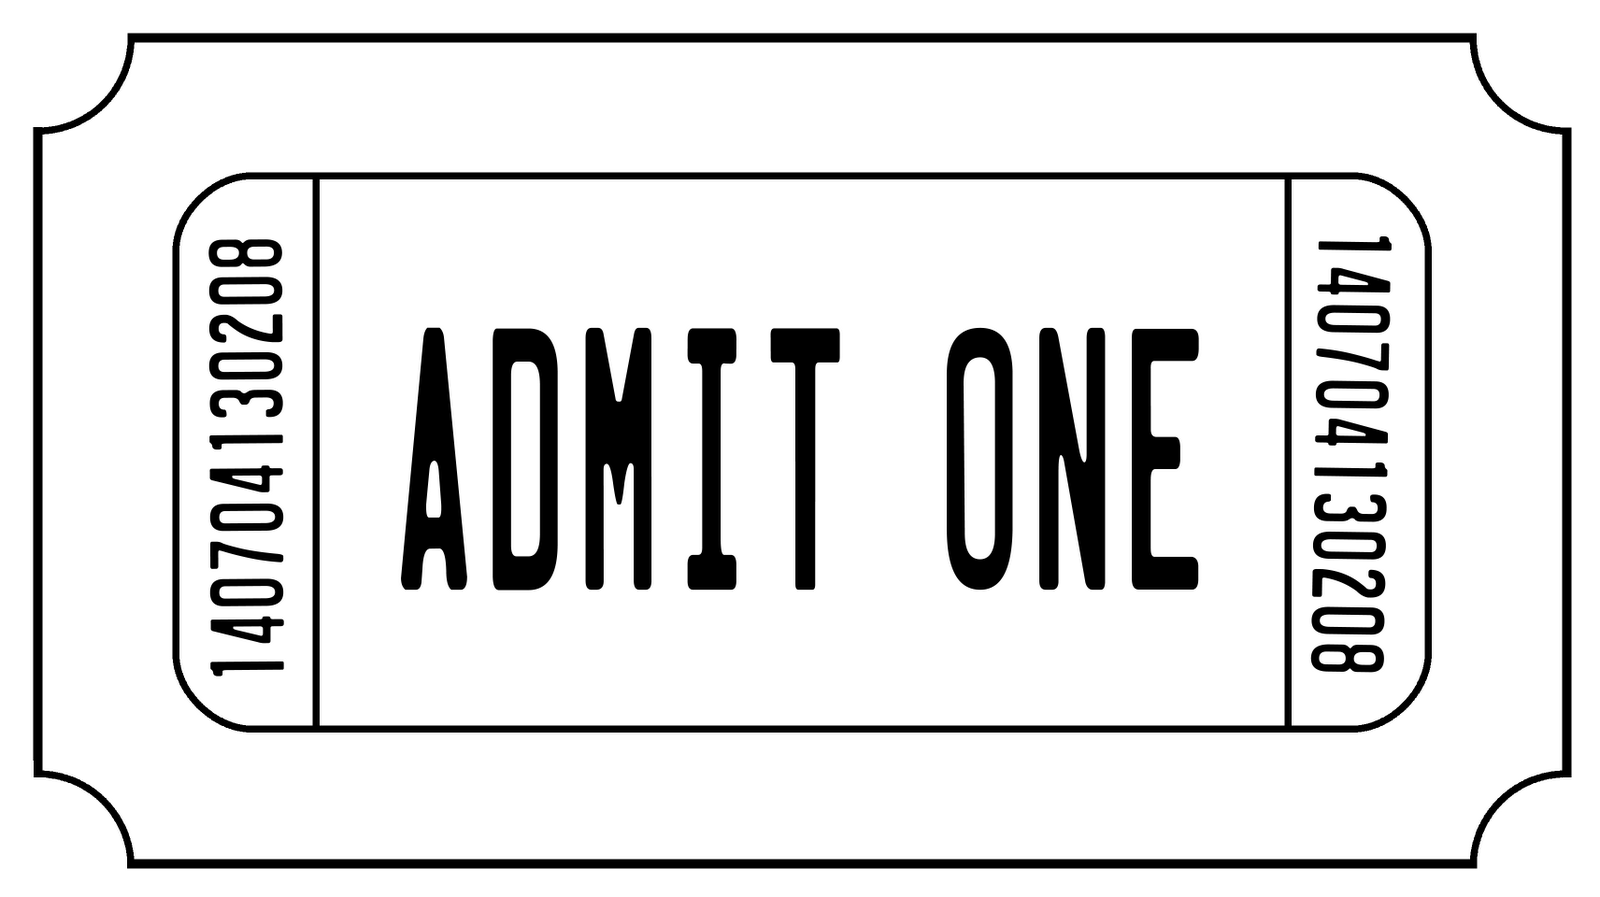 Free Admit One Ticket Png, Download Free Clip Art, Free Clip.